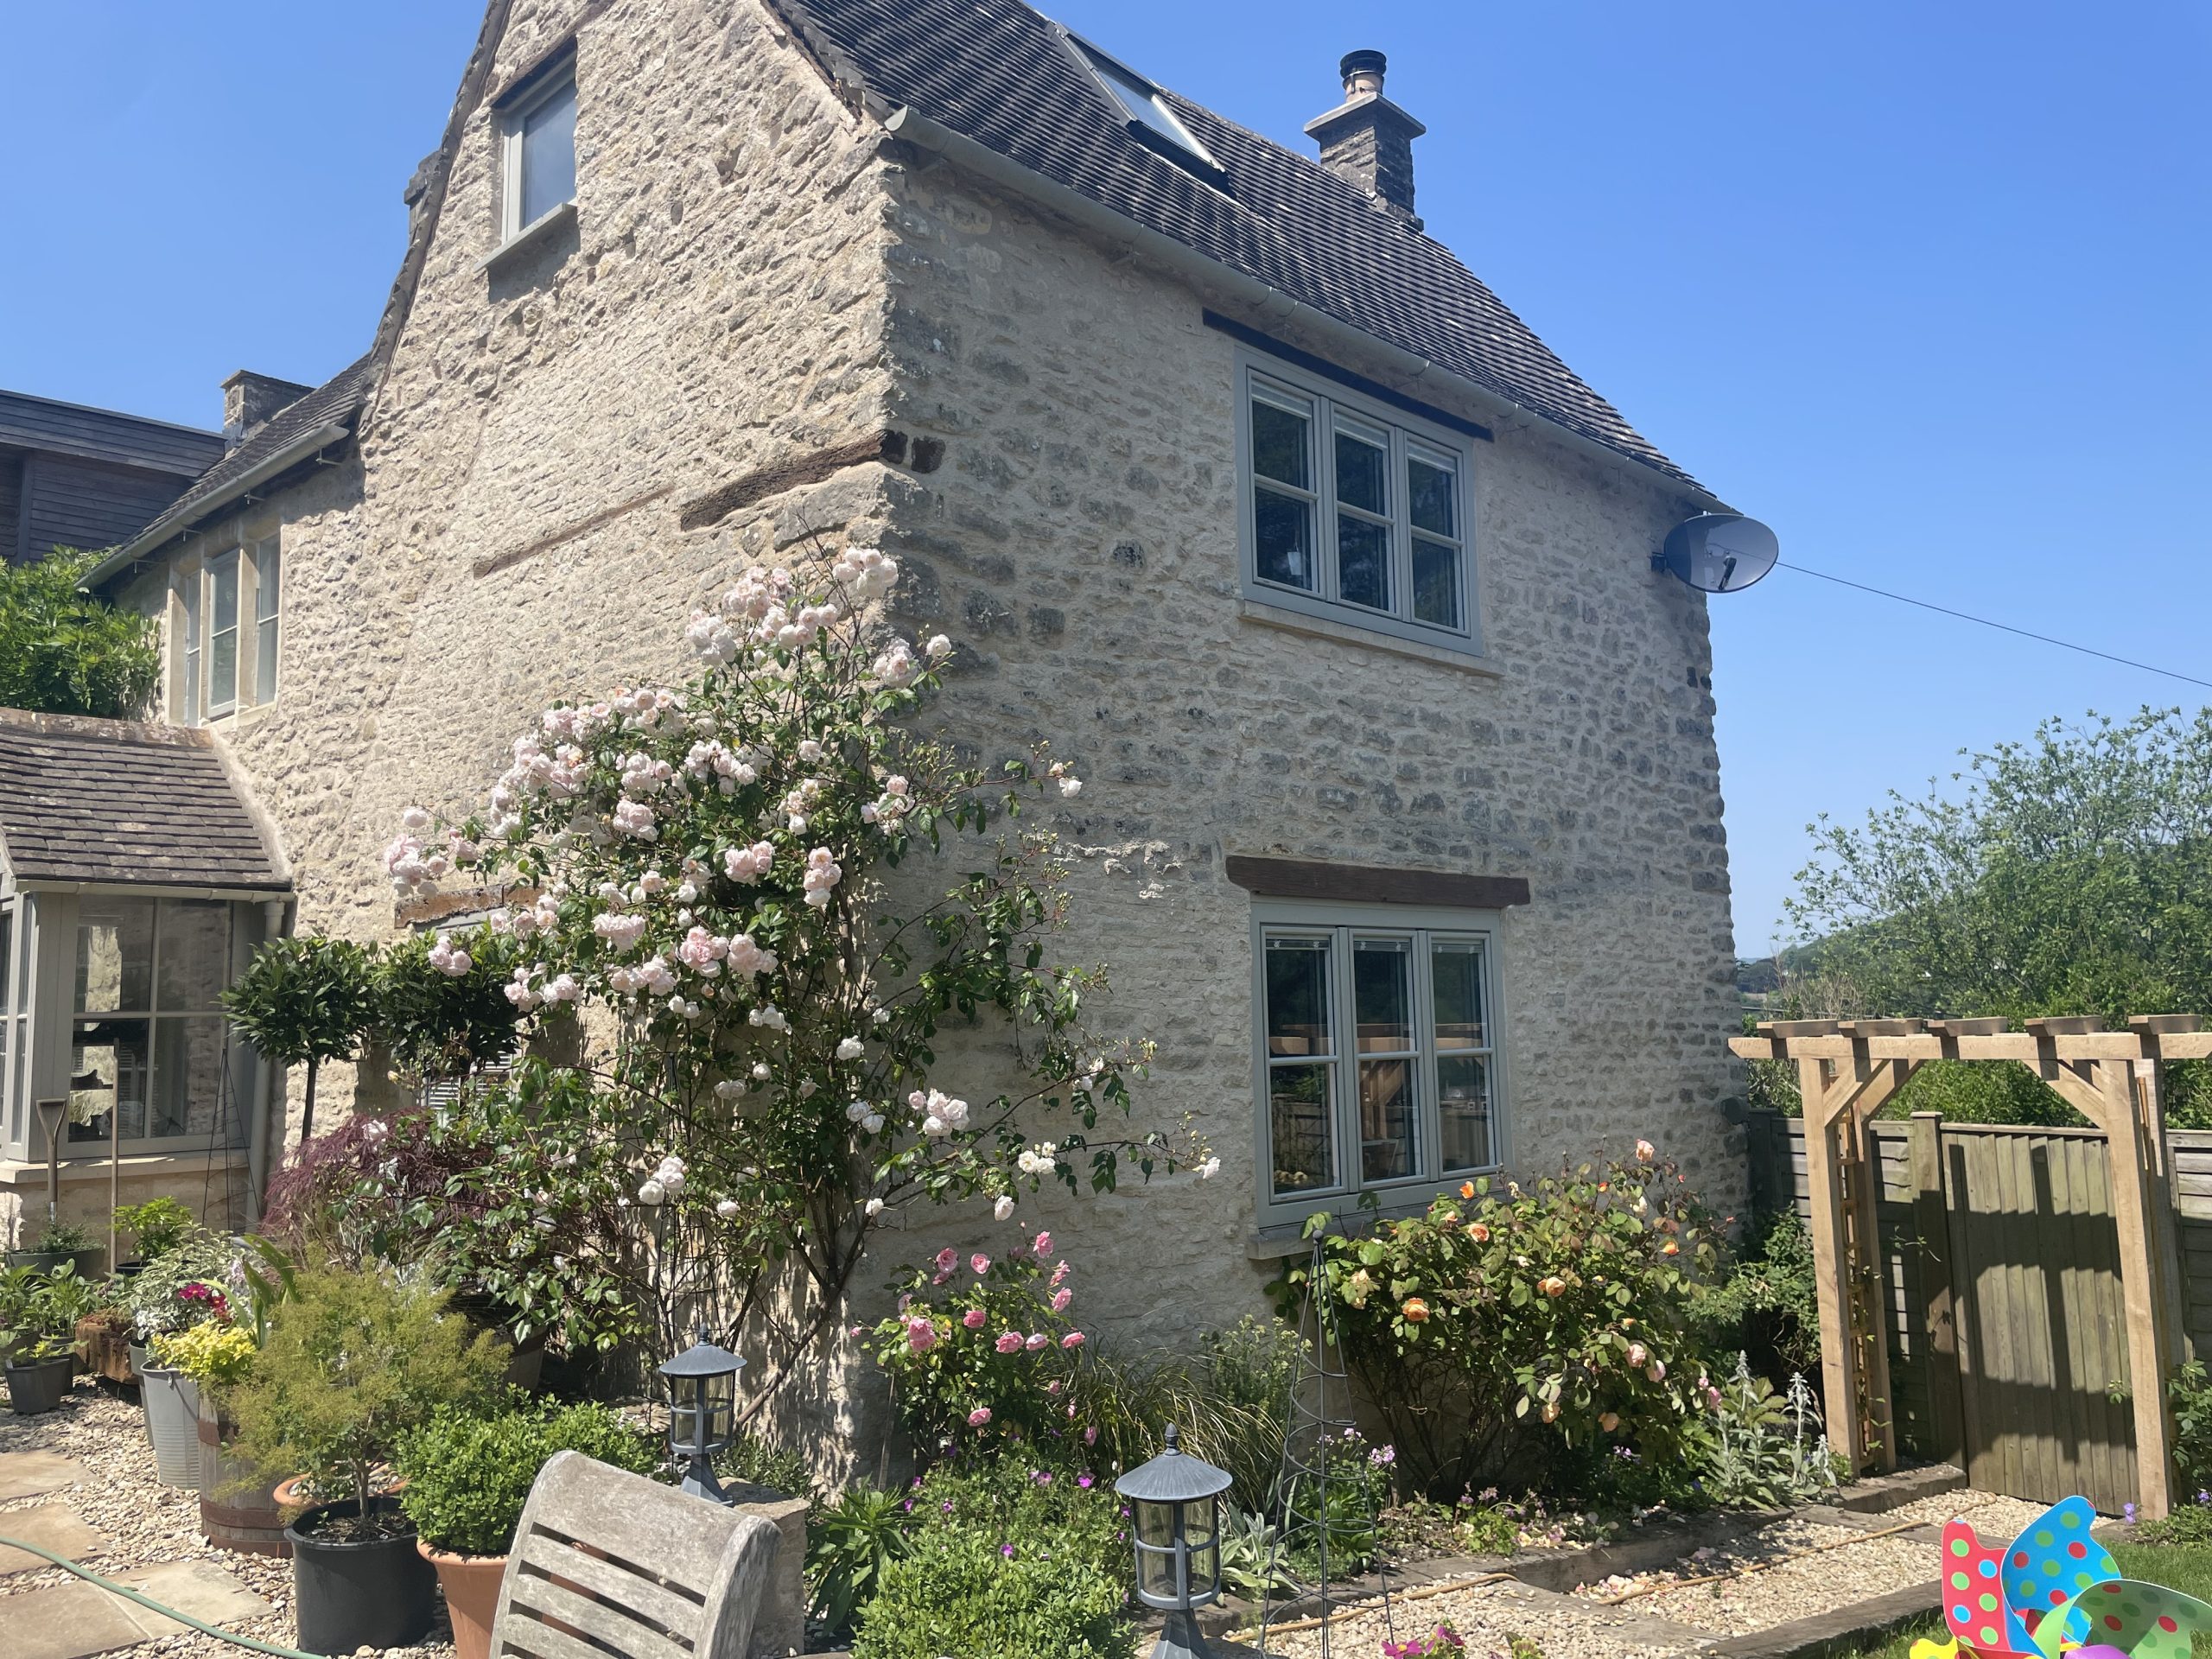 A charming 300-year old cottage in the Cotswolds